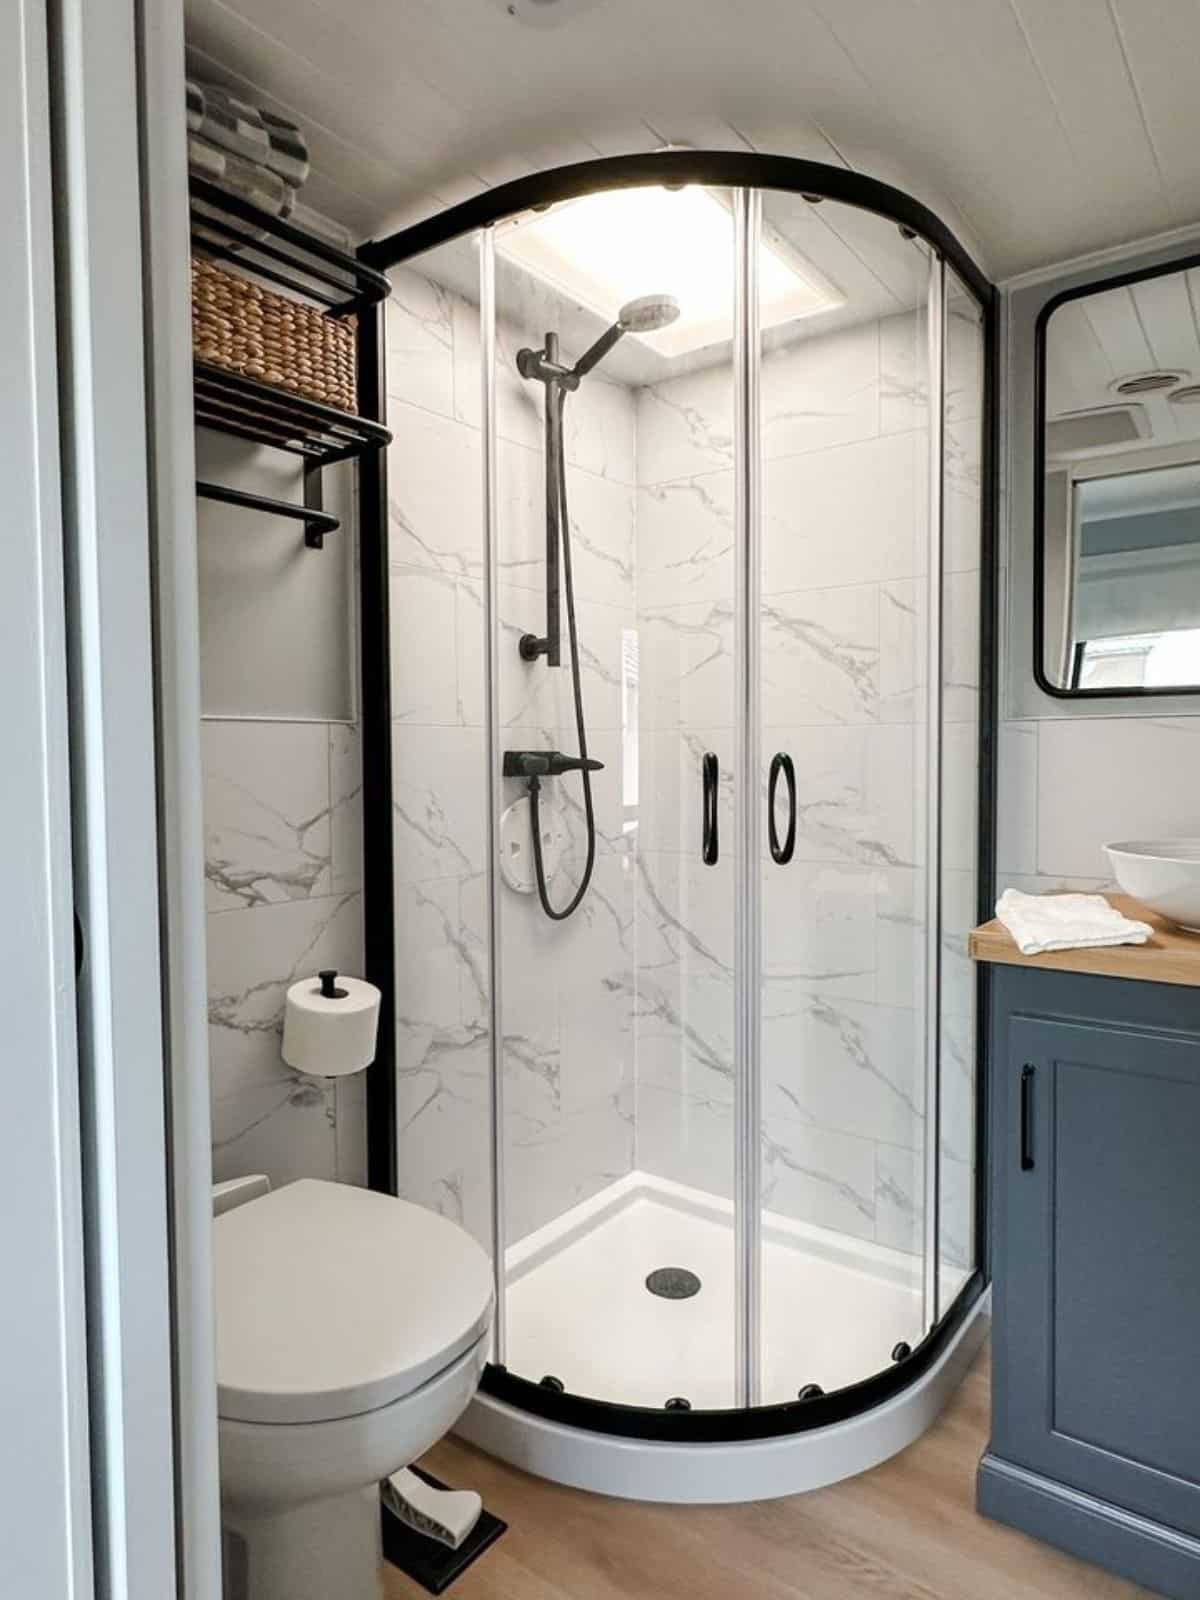 glass enclosure shower area and standard toilet in bathroom of remodeled RV